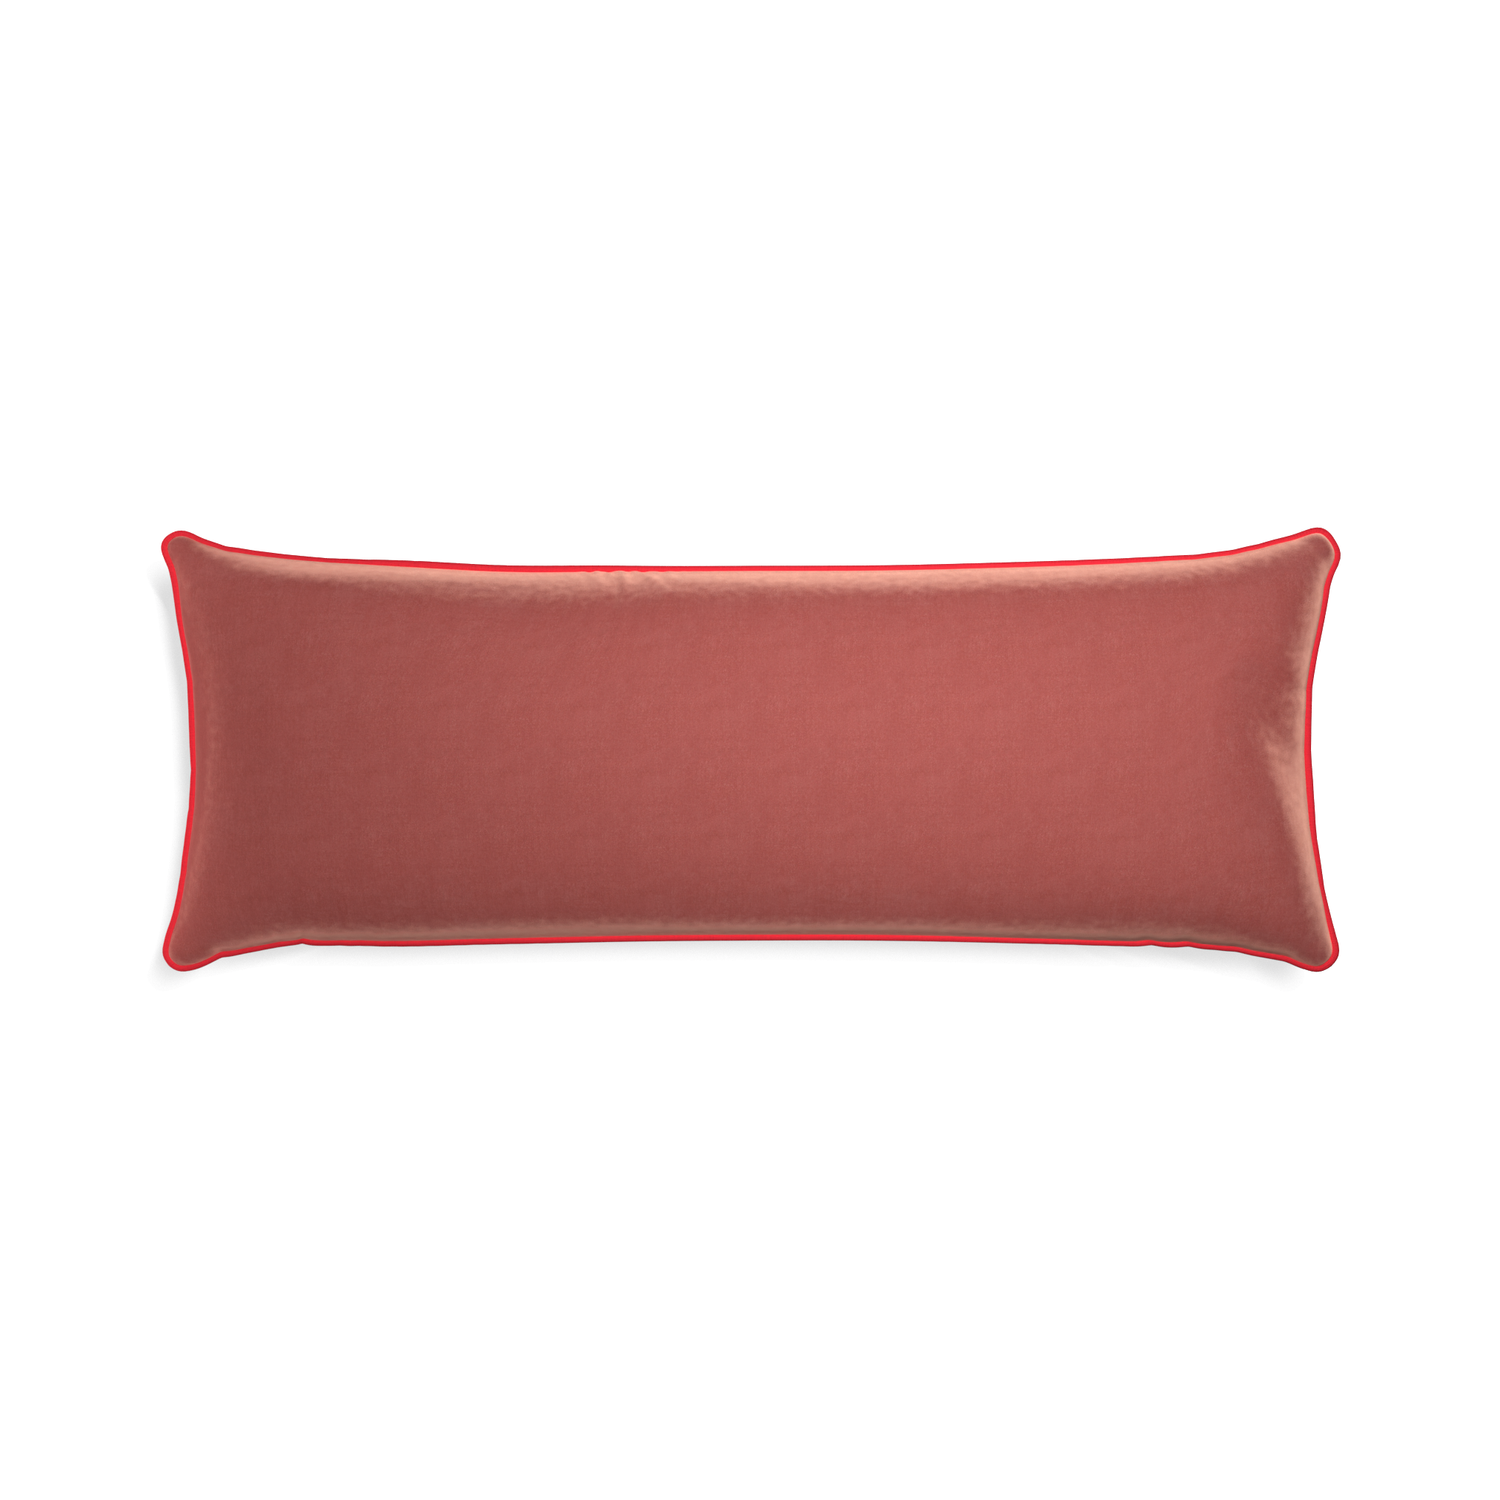 Xl-lumbar cosmo velvet custom pillow with cherry piping on white background